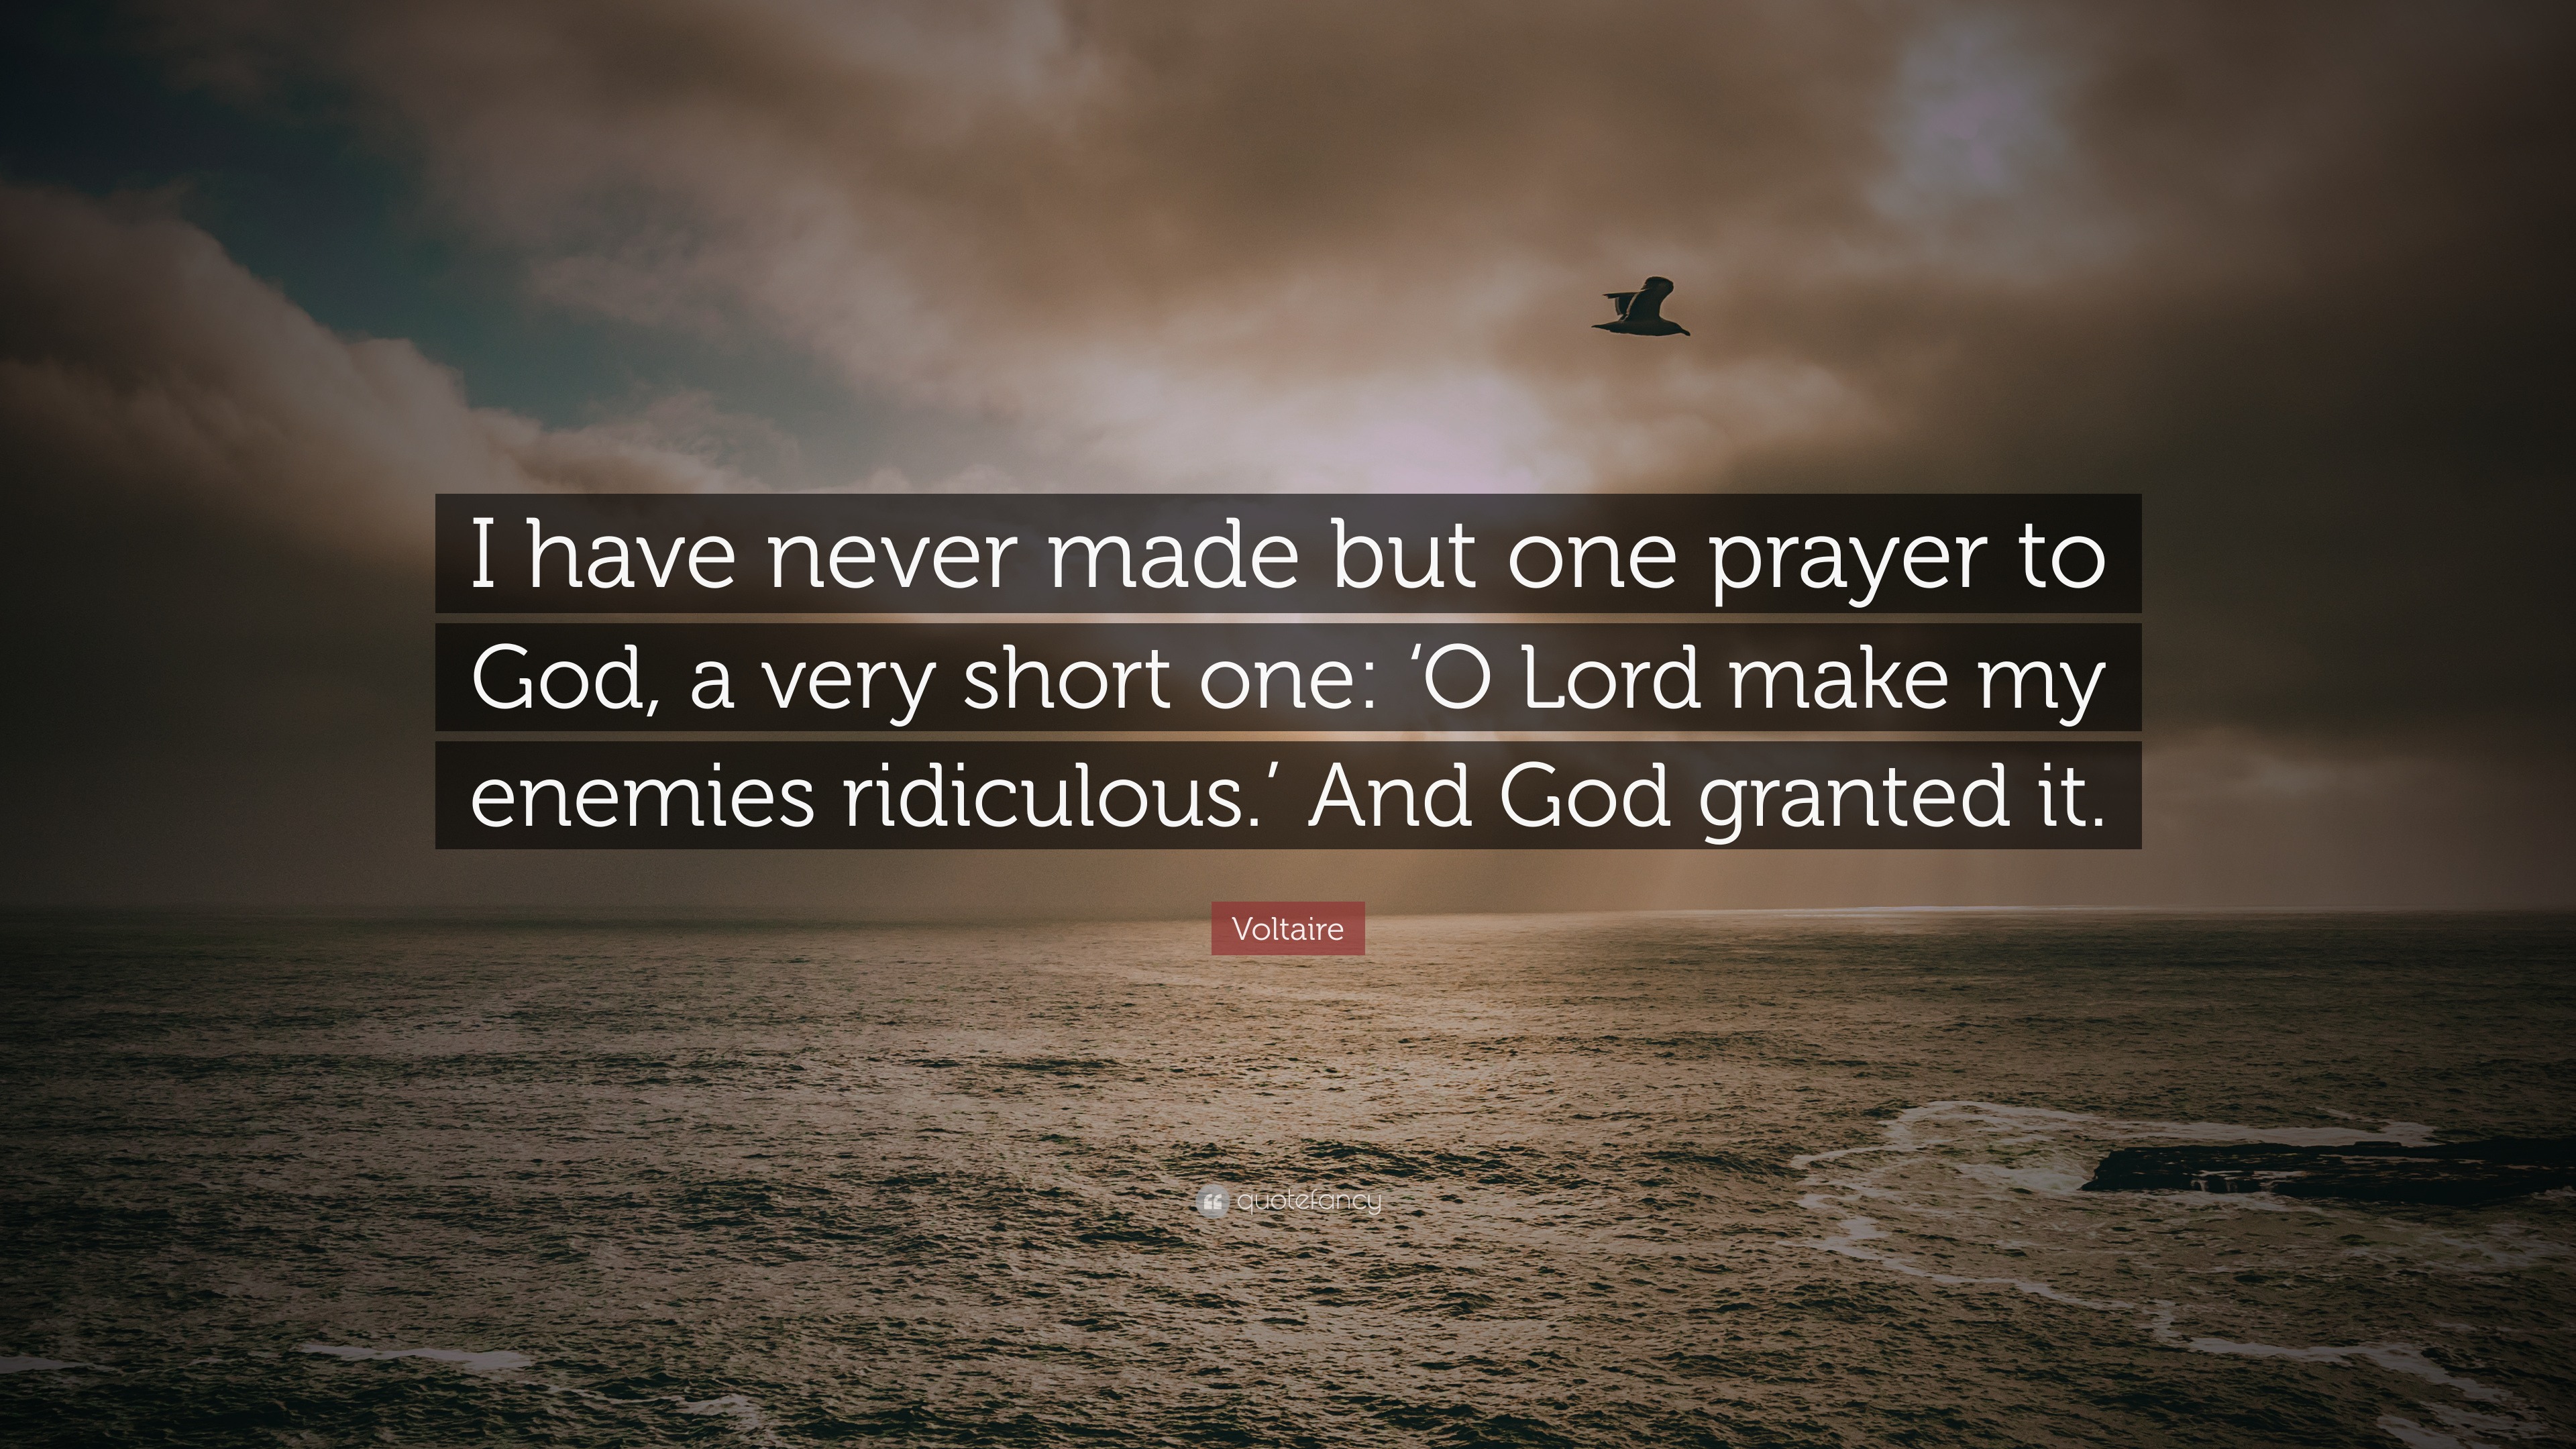 2110139-Voltaire-Quote-I-have-never-made-but-one-prayer-to-God-a-very.jpg.